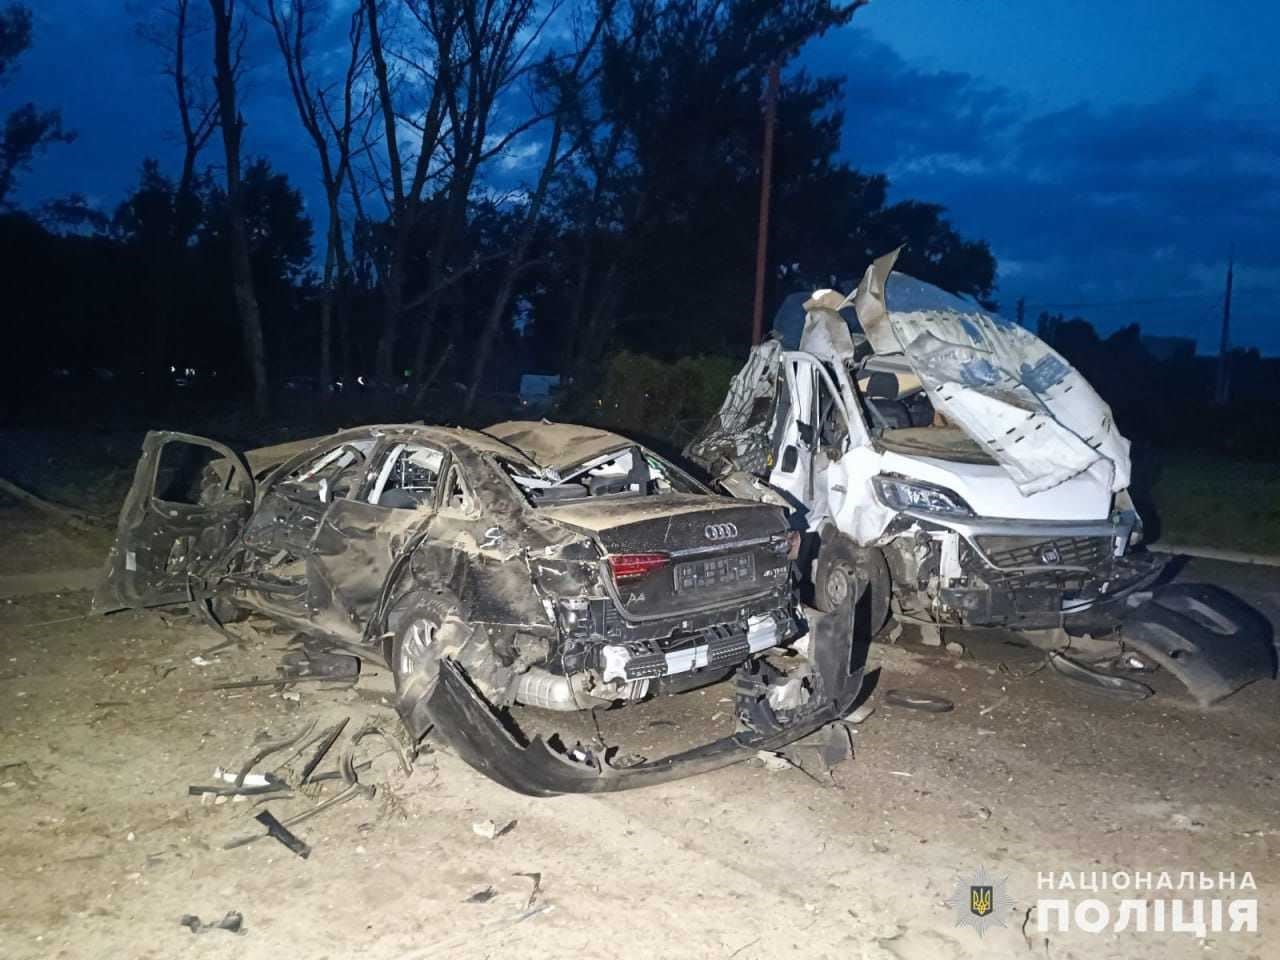 Two destroyed cars after Russian tank fire.